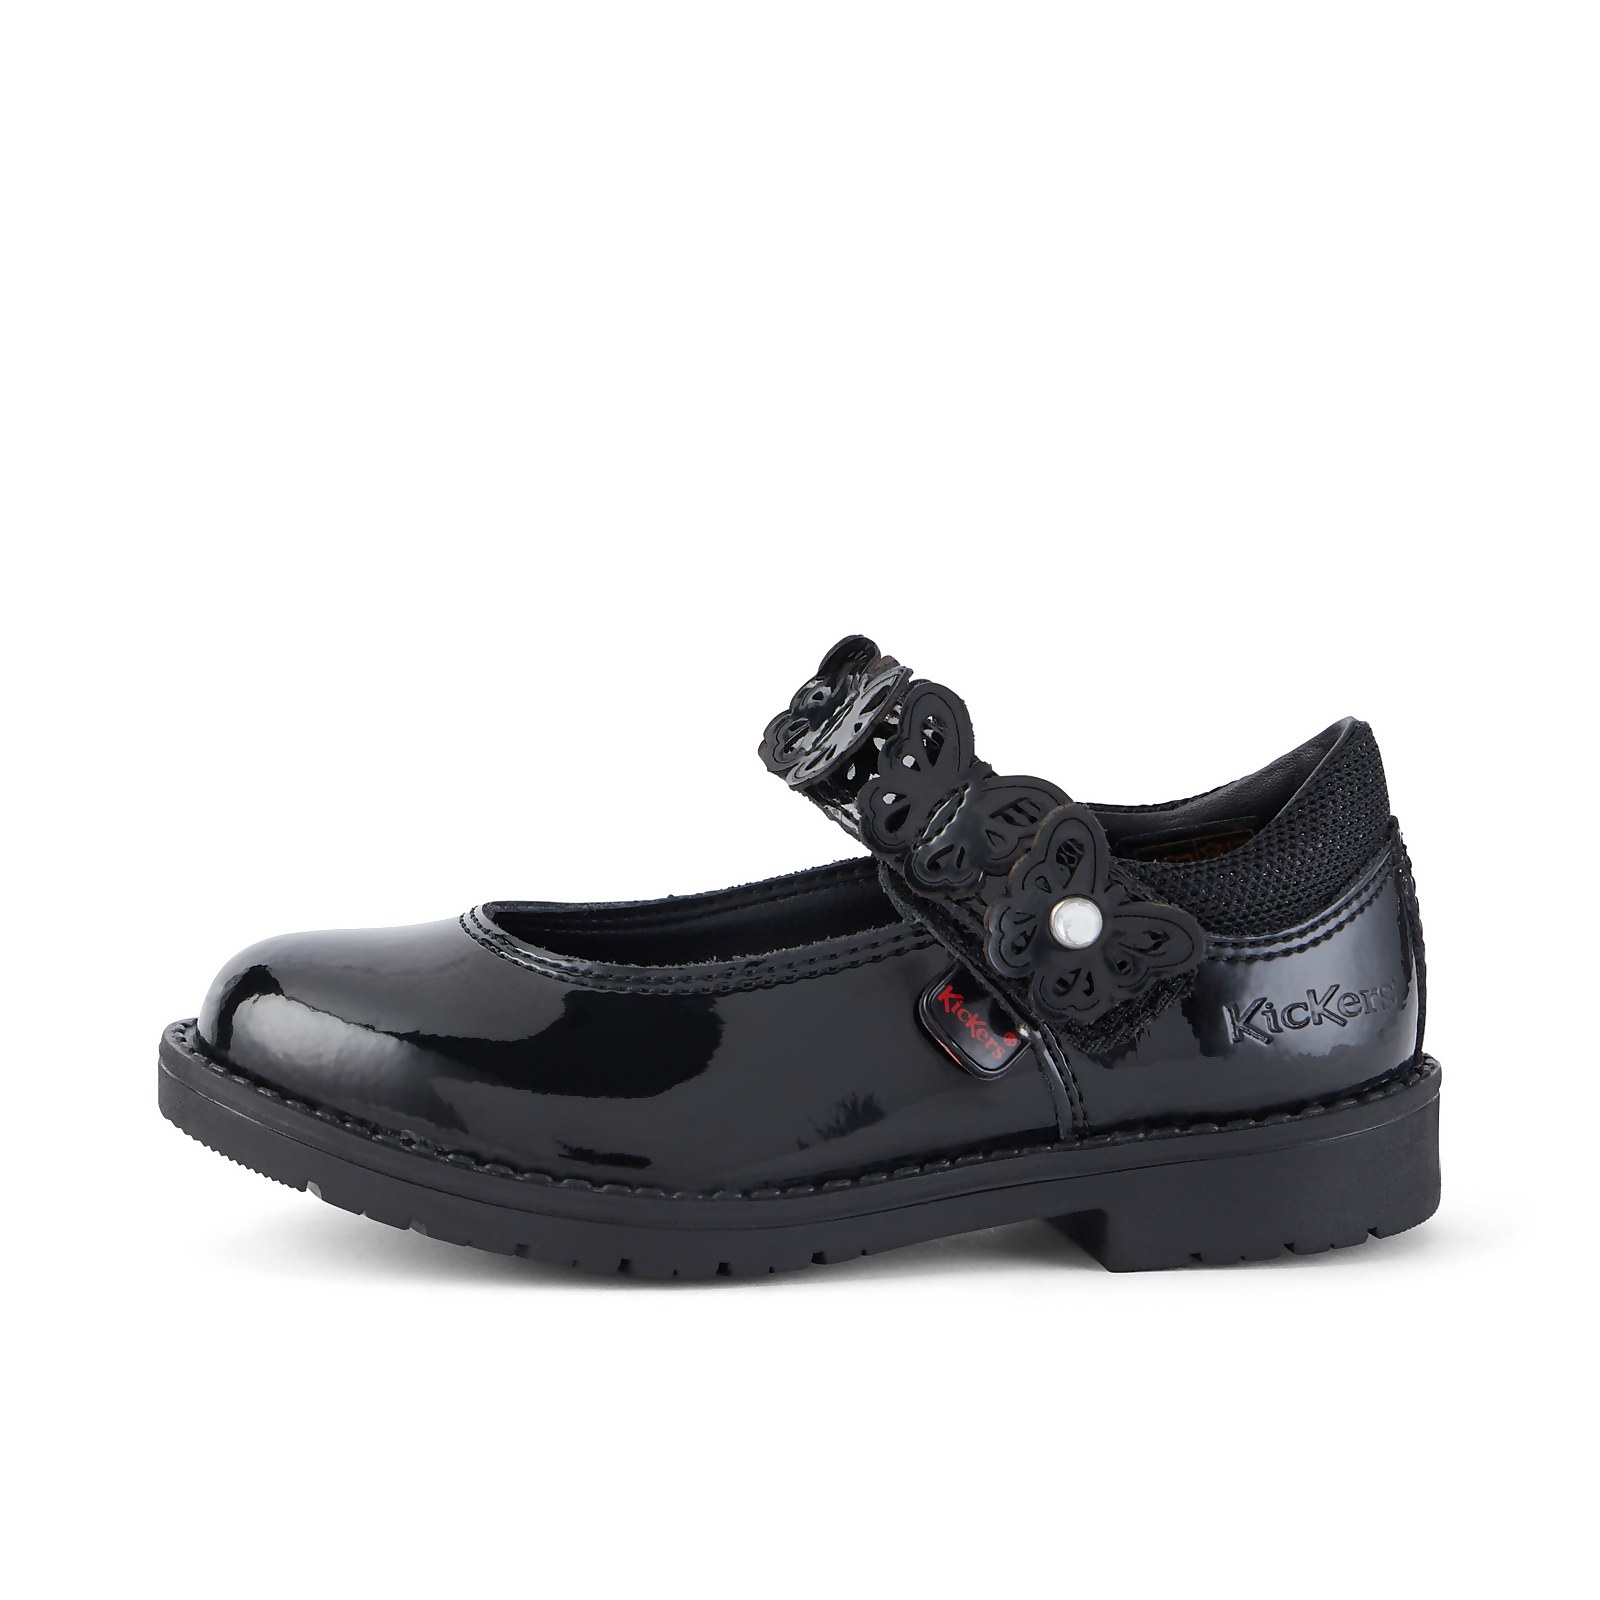 Infant Girls Lachly Butterfly Mj Patent Leather Black